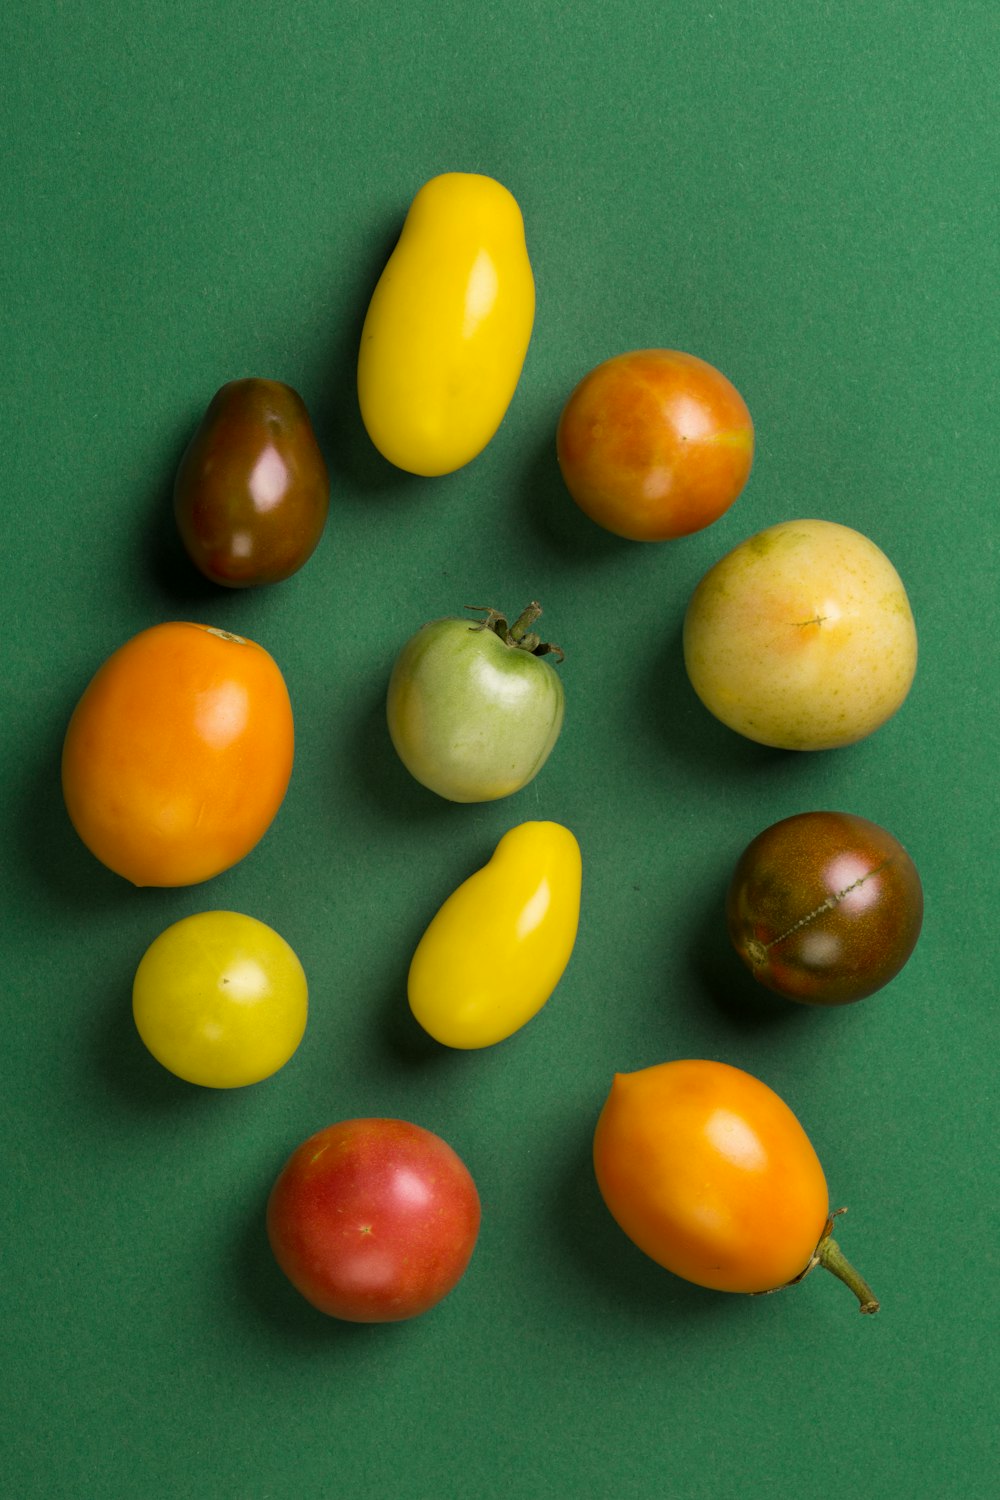 yellow and red tomato and yellow round fruit